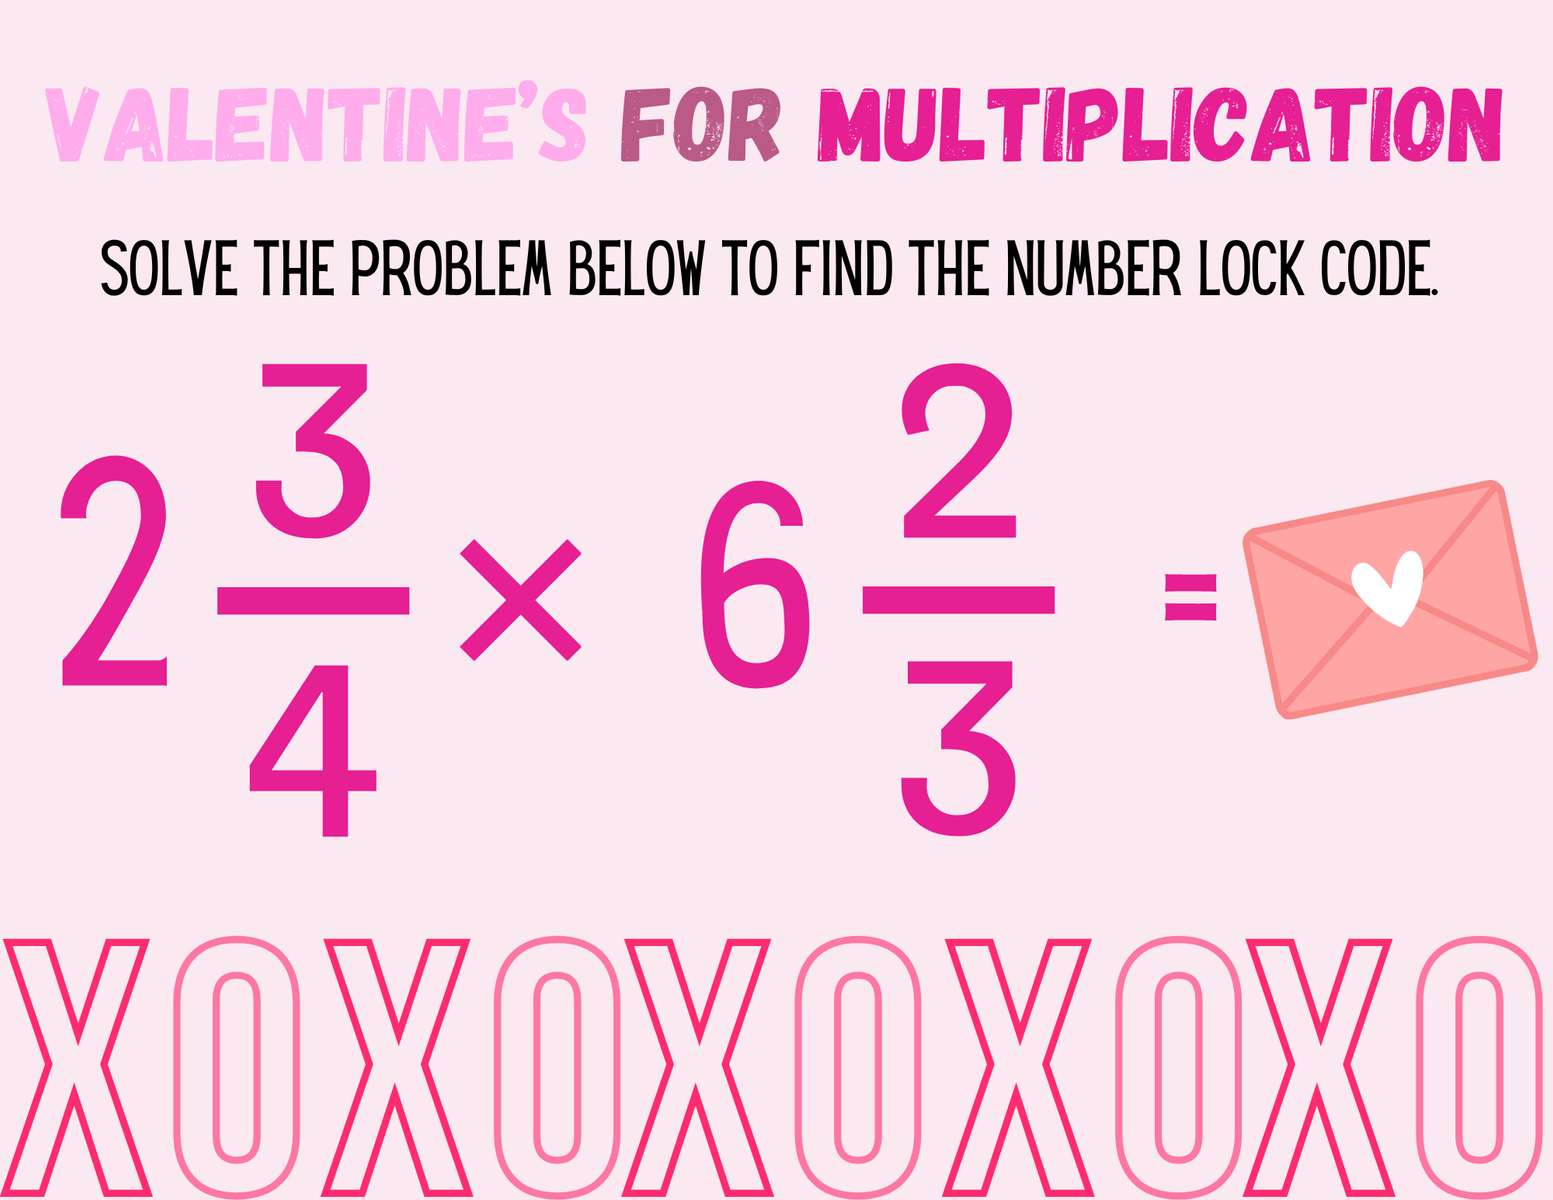 VALENTINES puzzle online from photo